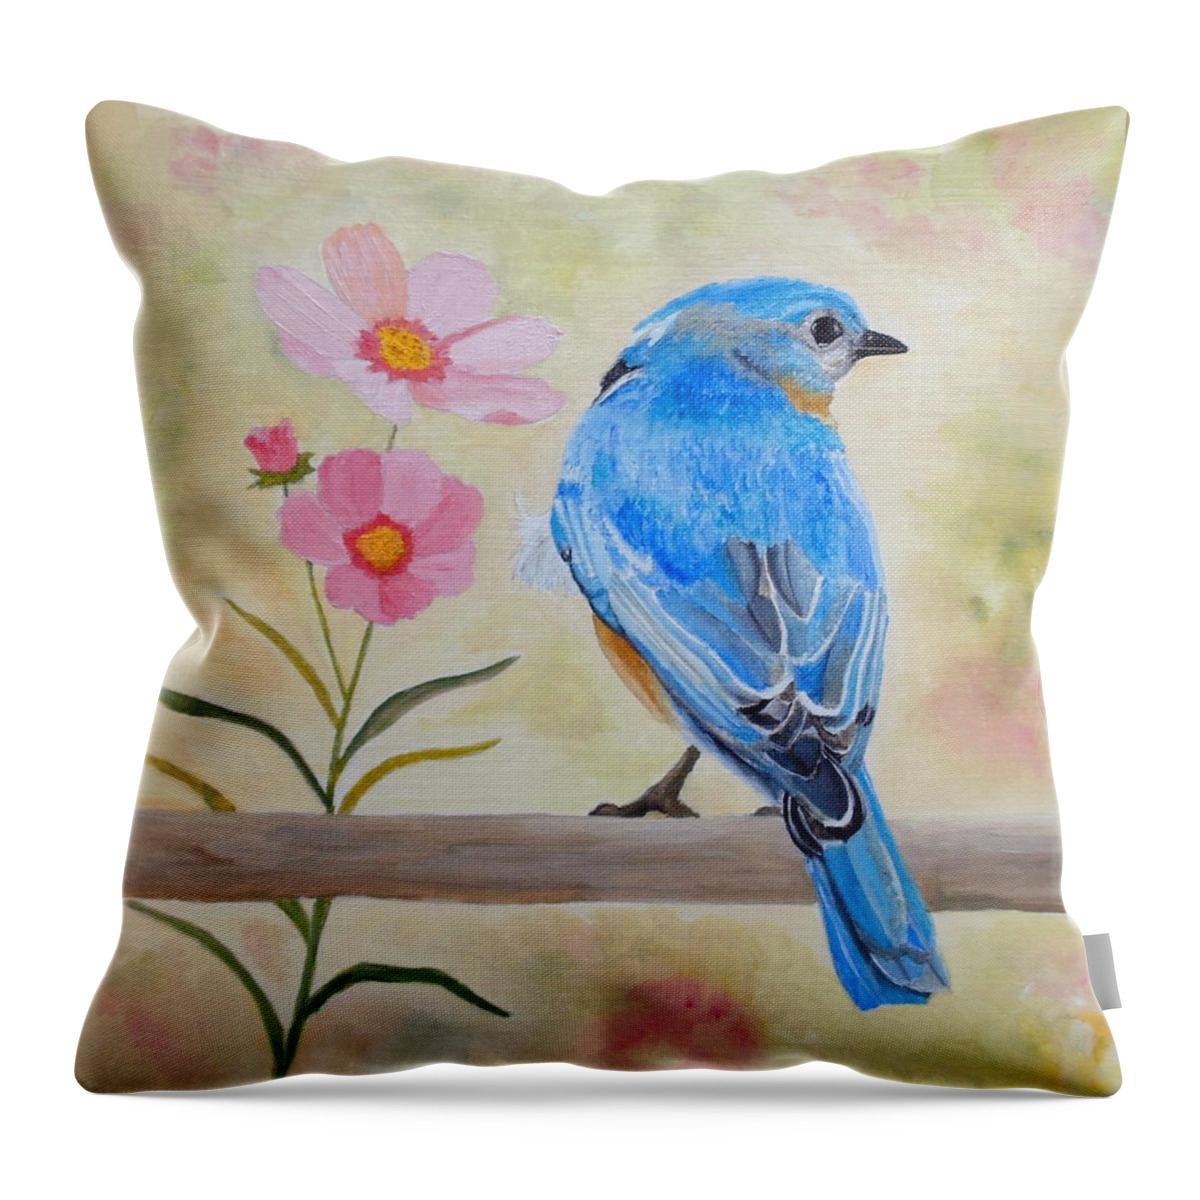 Bluebird Throw Pillow featuring the painting Bluebird Prom Day by Angeles M Pomata